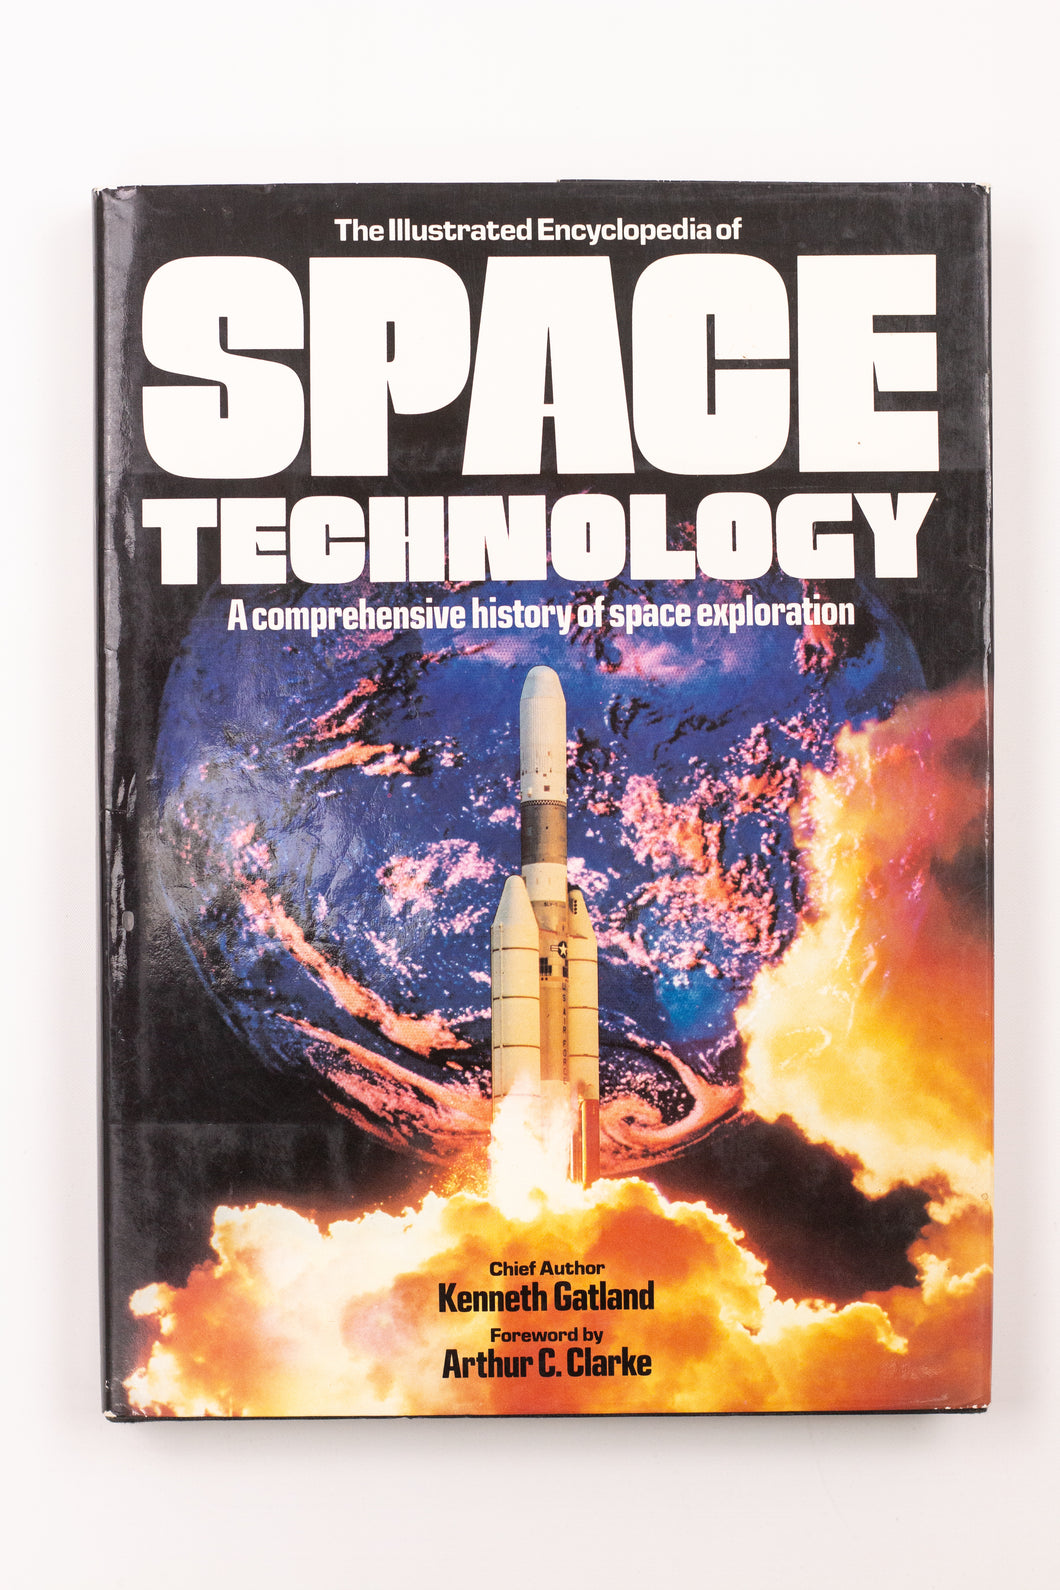 SPACE TECHNOLOGY BOOK